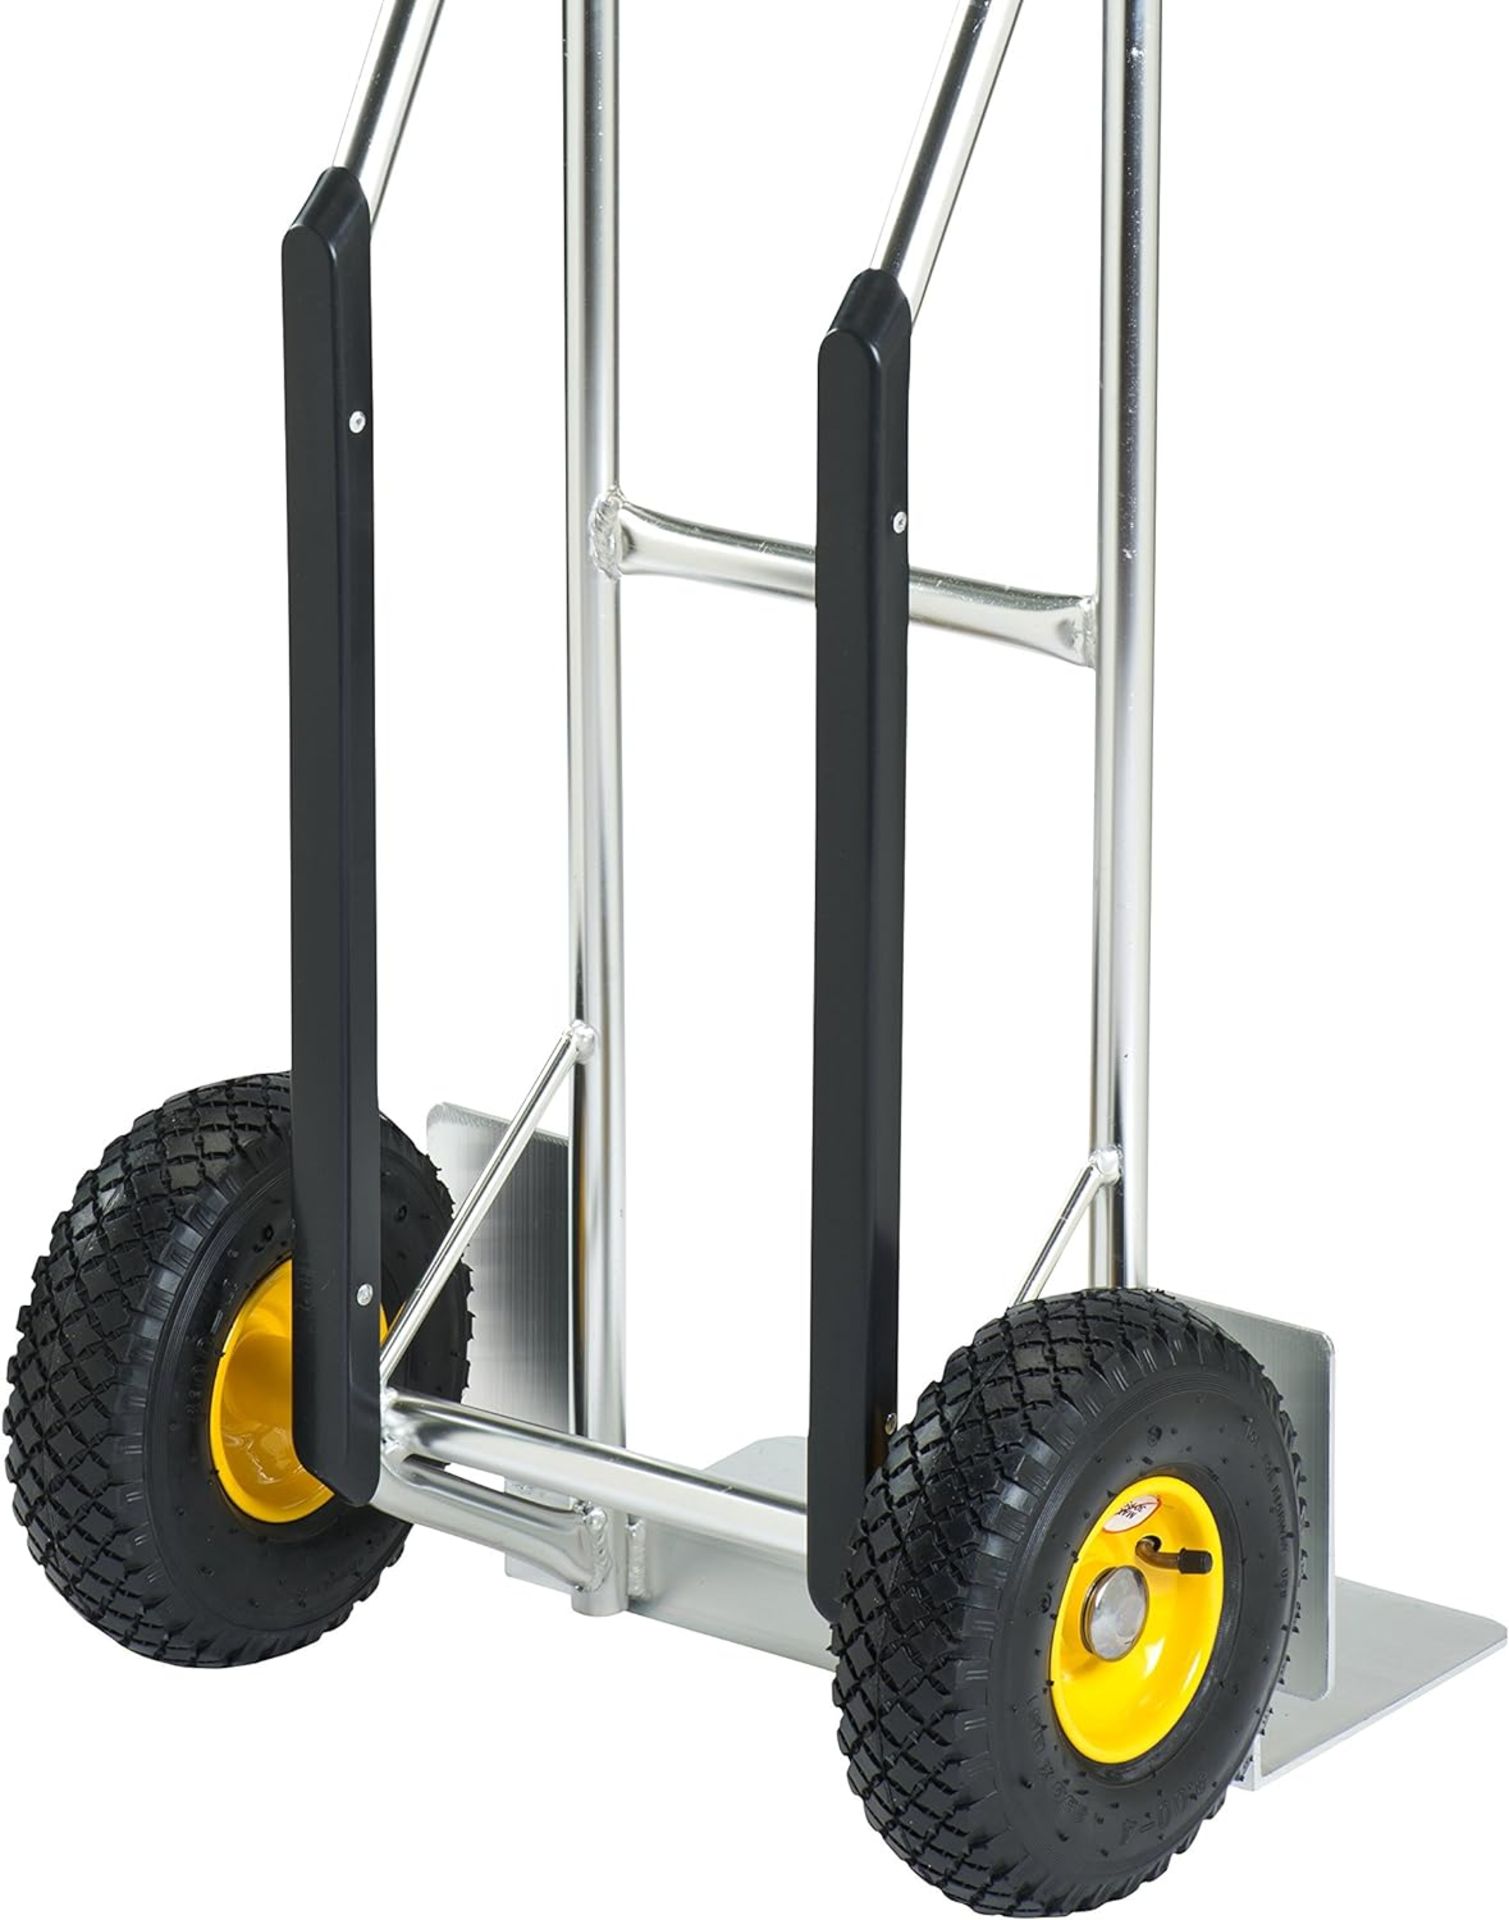 Stanley Aluminium Hand Truck-200KG, Silver, SXWTC-HT525, Large pneumatic wheels allow for easy - Image 4 of 5